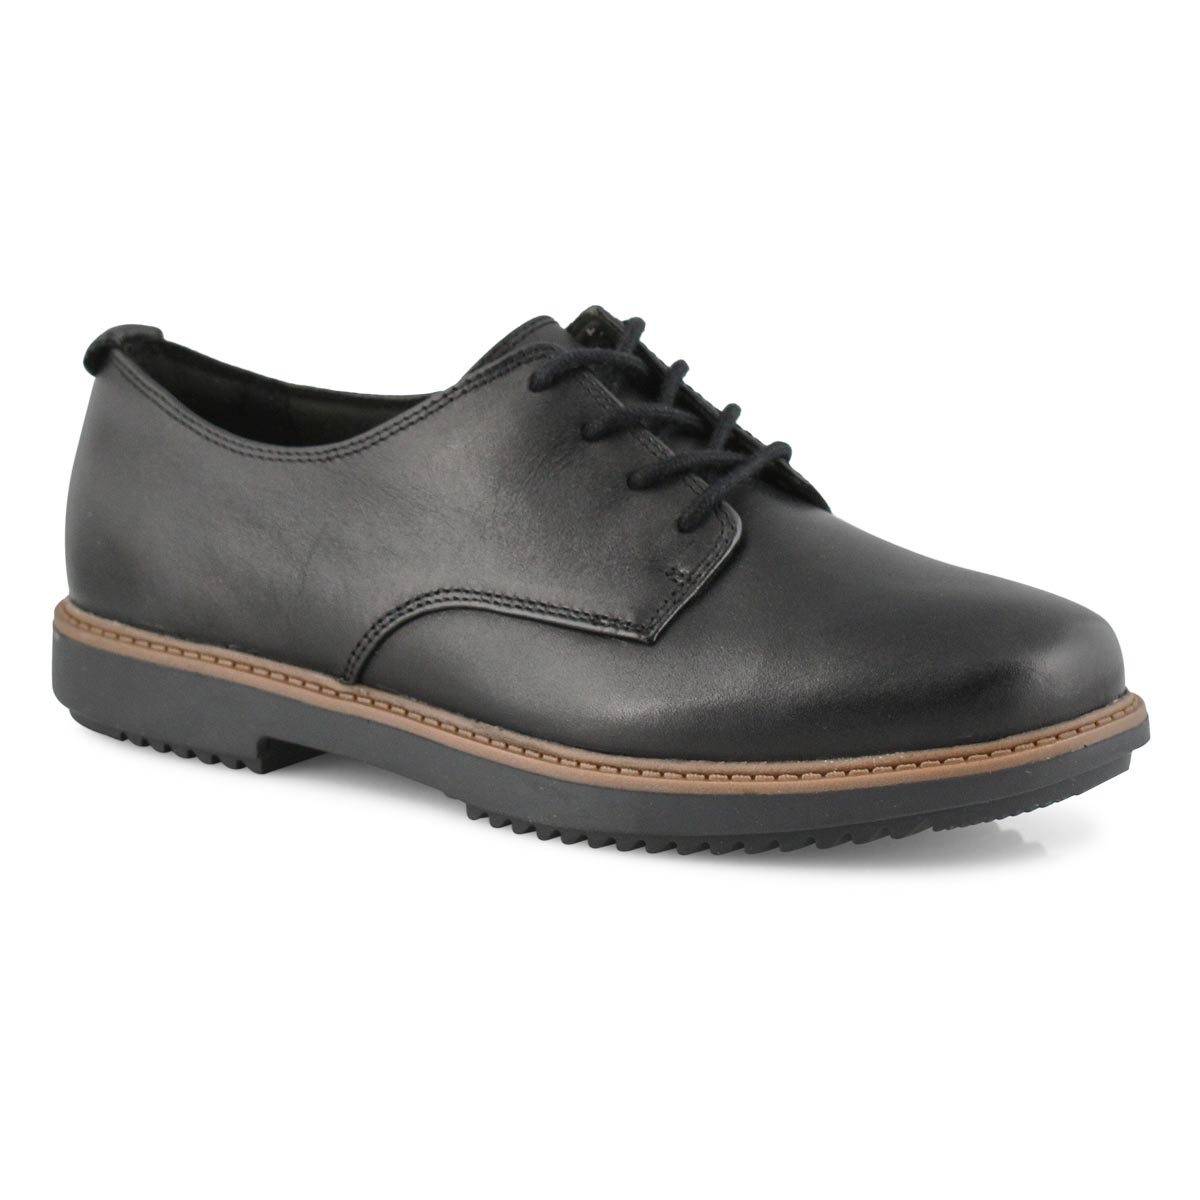 oxford shoe casual